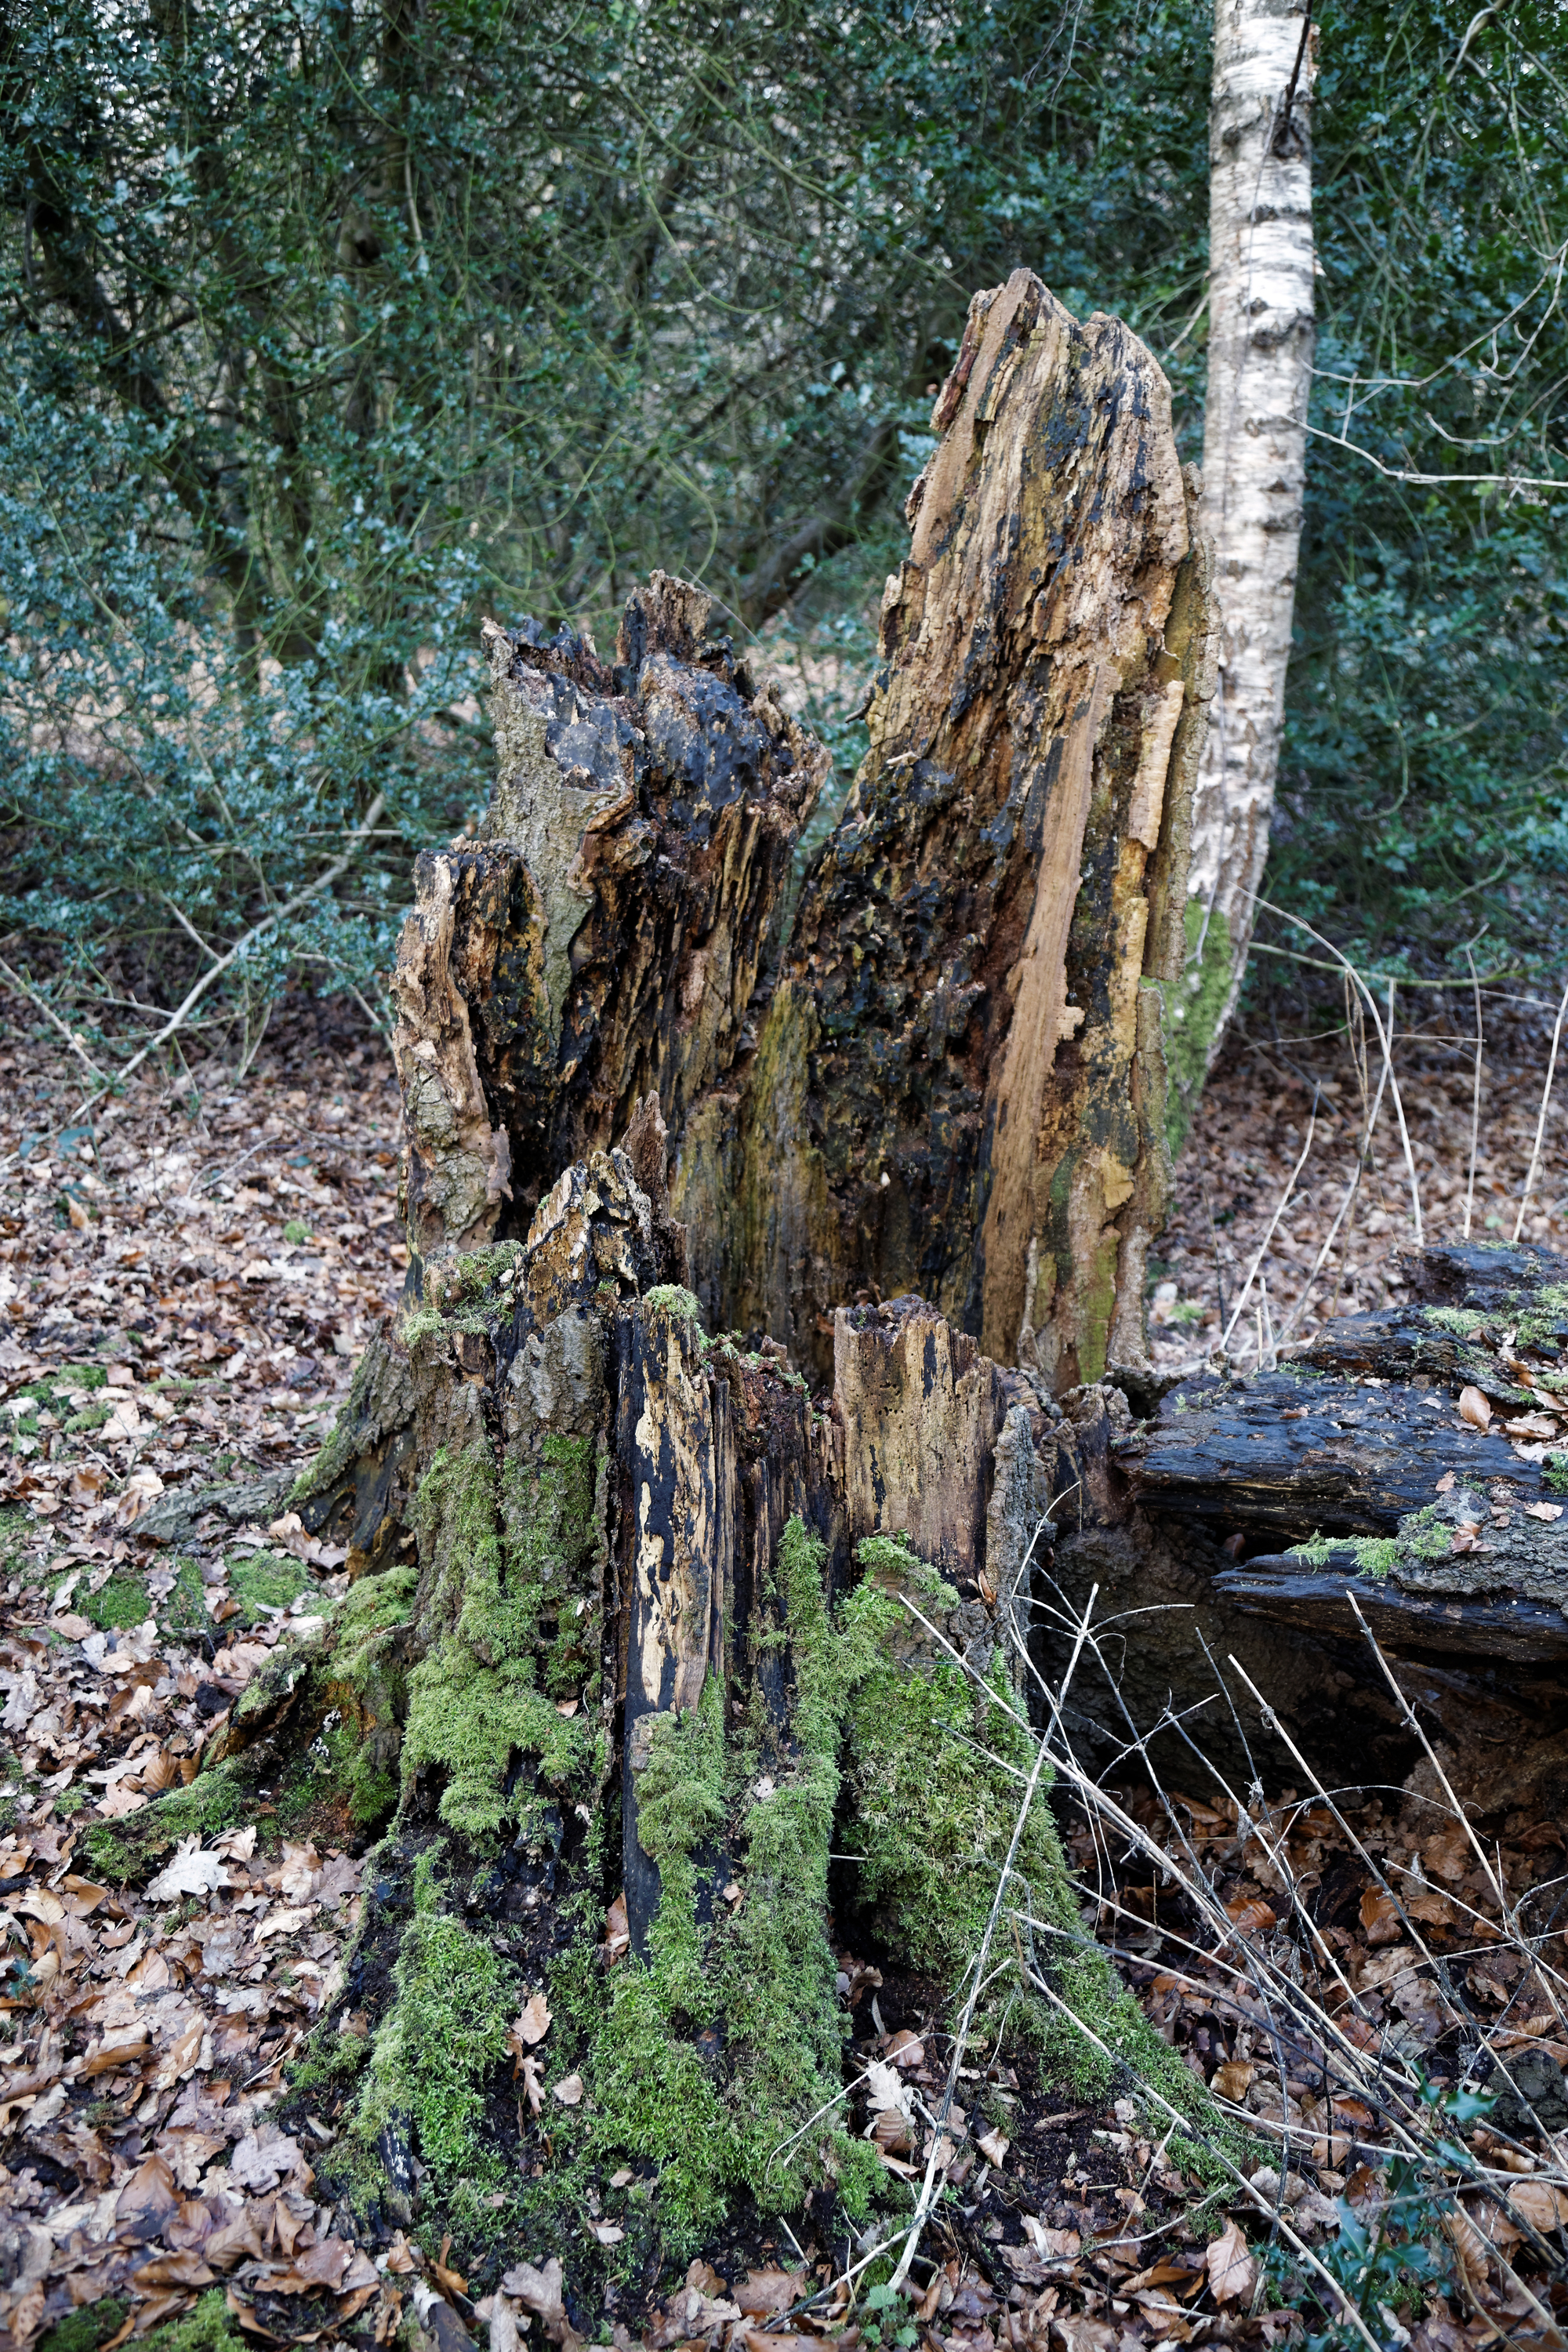 File:Epping Forest High Beach Essex England - rotted tree stump.jpg ...